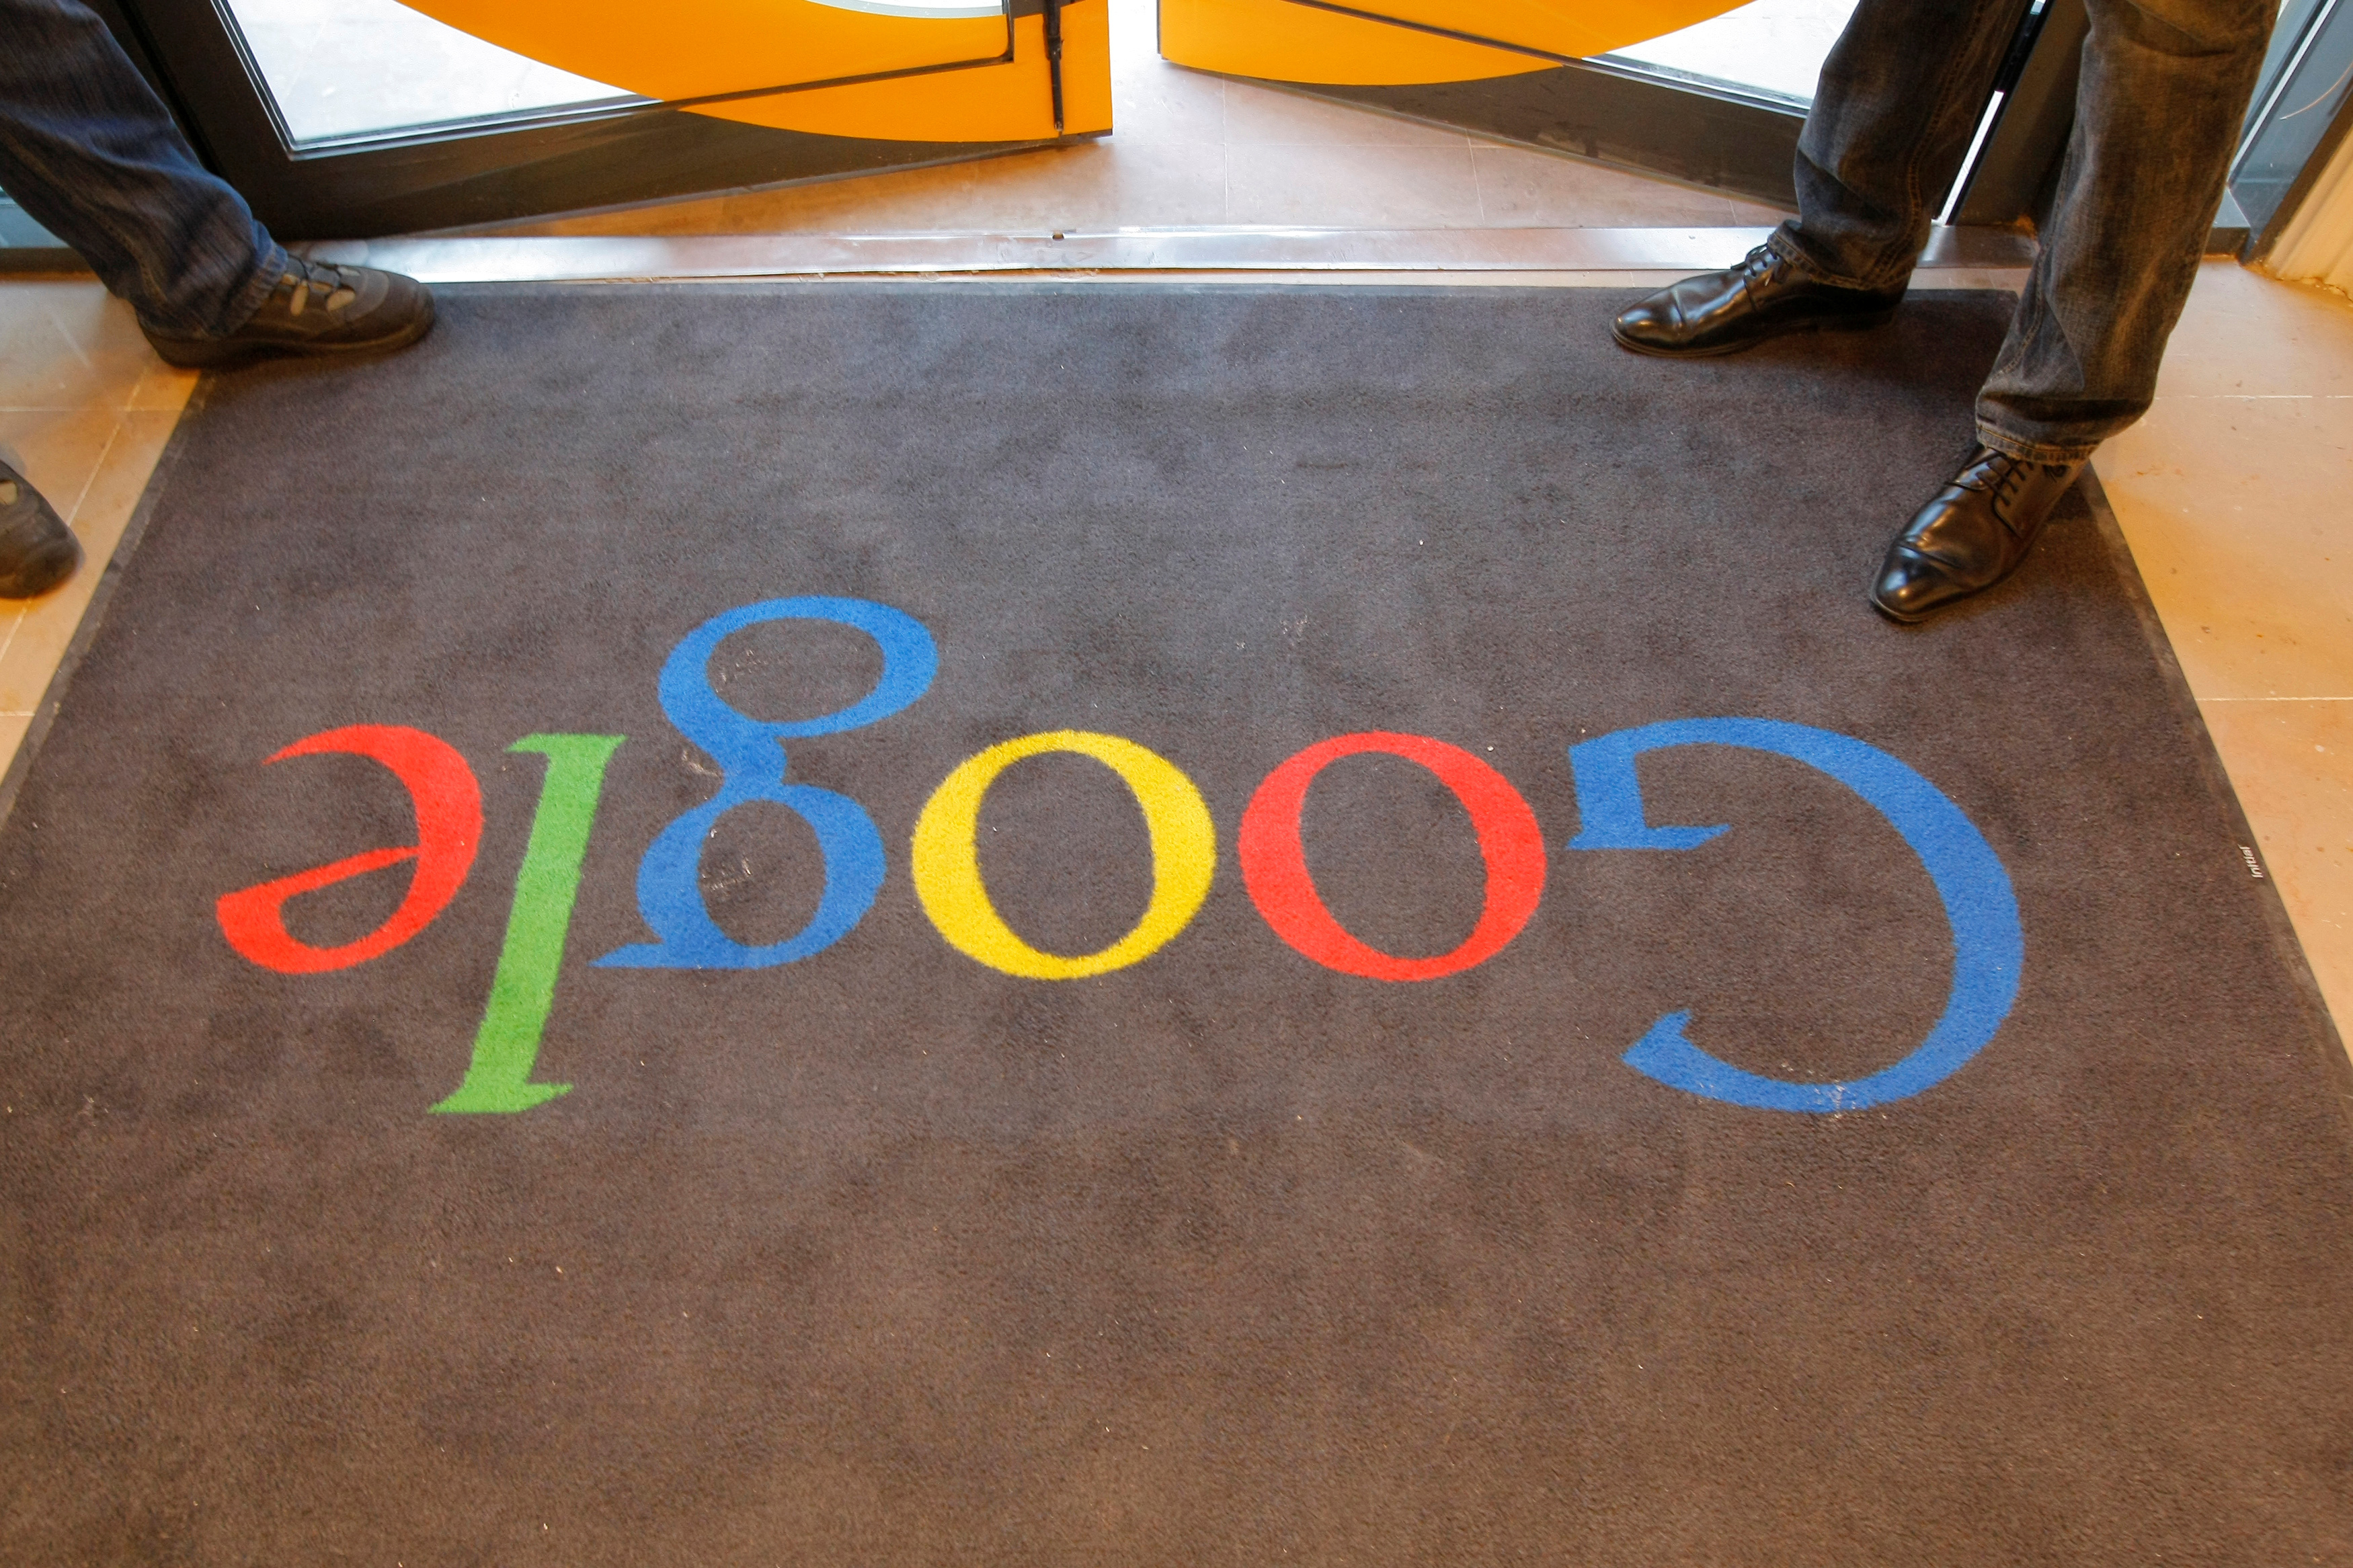 A Google carpet is seen at the entrance of the new headquarters of Google France before its official inauguration in Paris, France, Dec. 6, 2011. (Rueters)